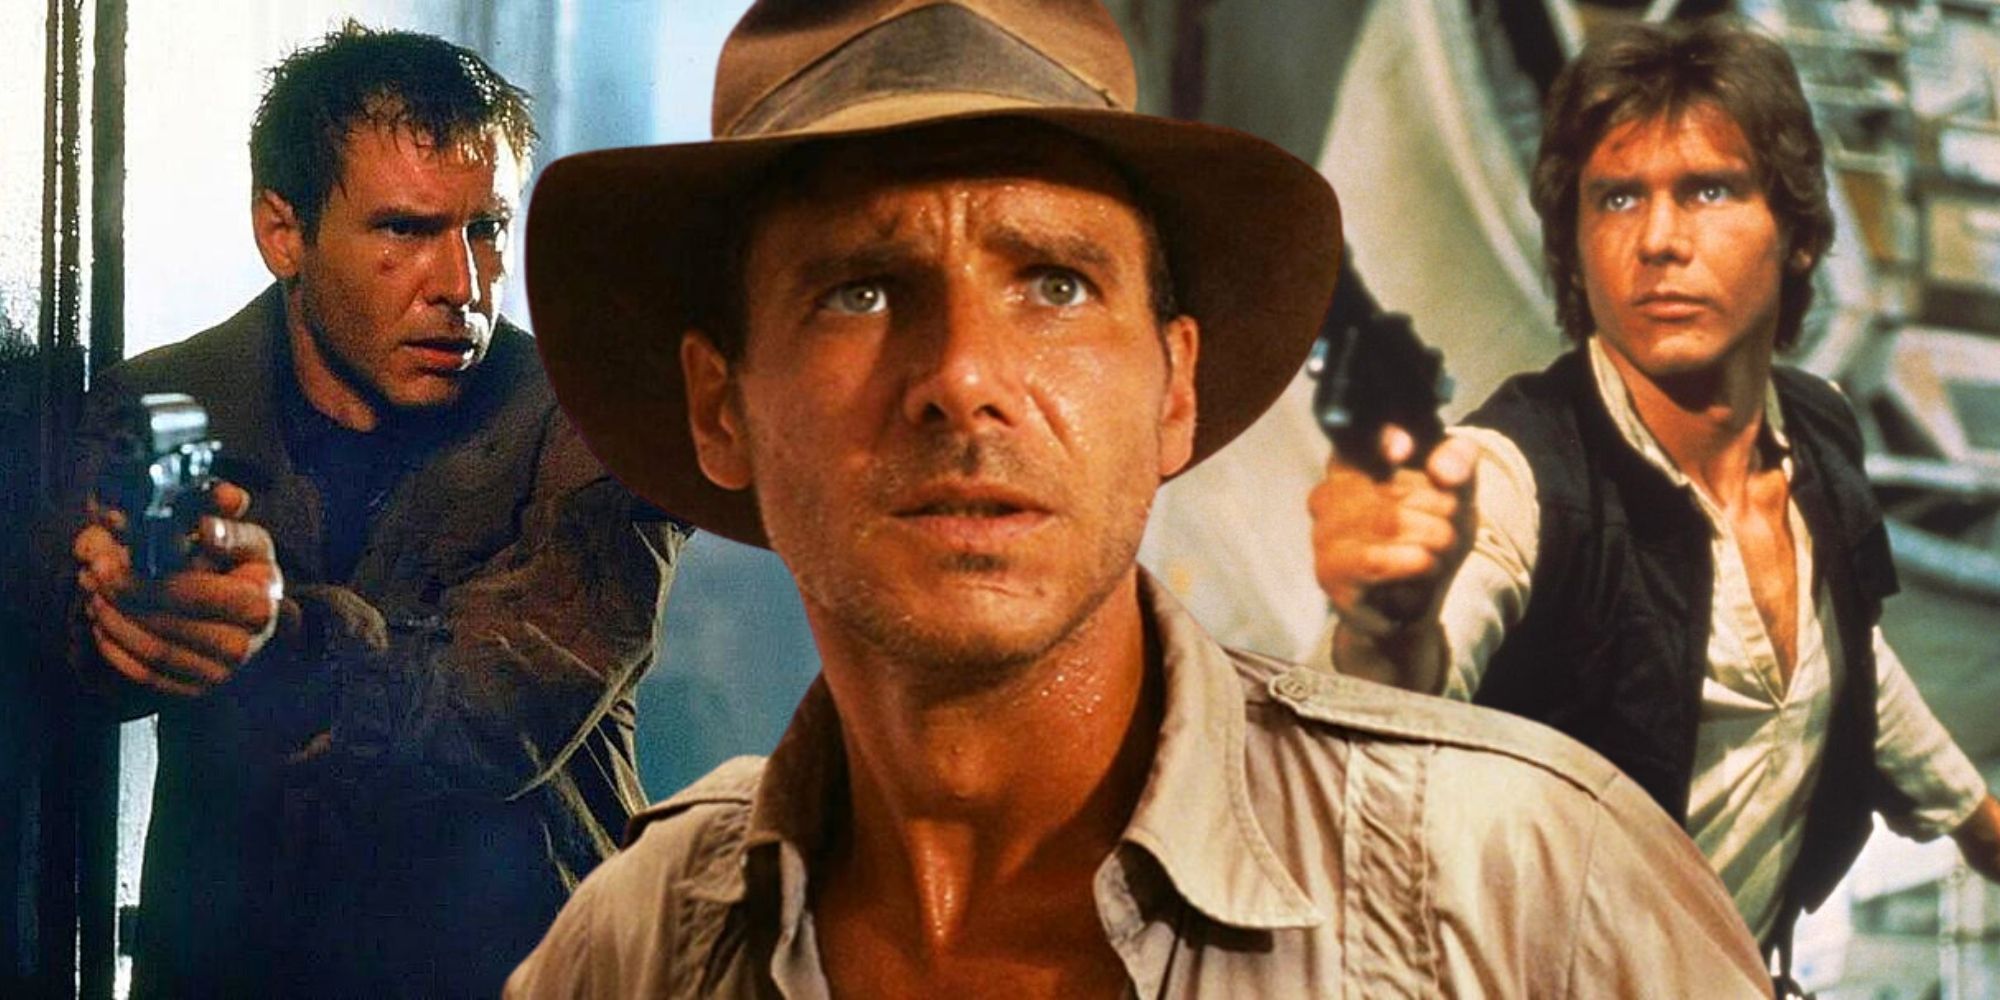 Harrison Ford as Rick Deckard, Indiana Jones, and Han Solo